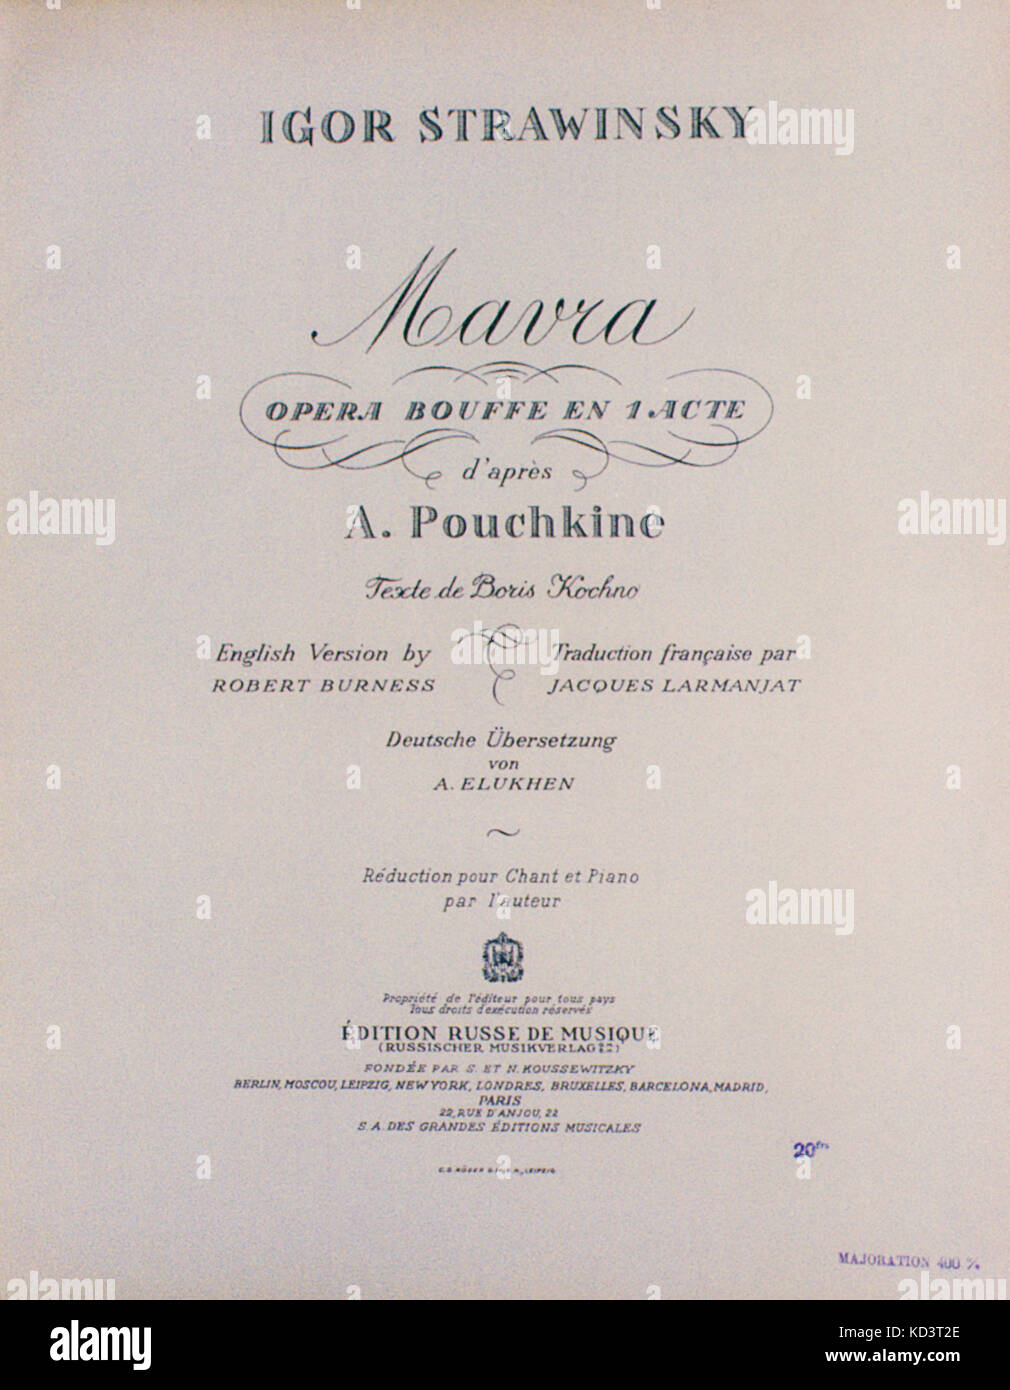 STRAVINSKY, IGOR- First edition of title page of Maura, opera bouffe en 1 acte d'après A. Pouchkine (Alexander Pushkin).  Text by Boris Kochno. Berlin, Edition Russe de Musique, 1925.  First performed Paris in June 1925. Russian composer, 1882-1971 Stock Photo